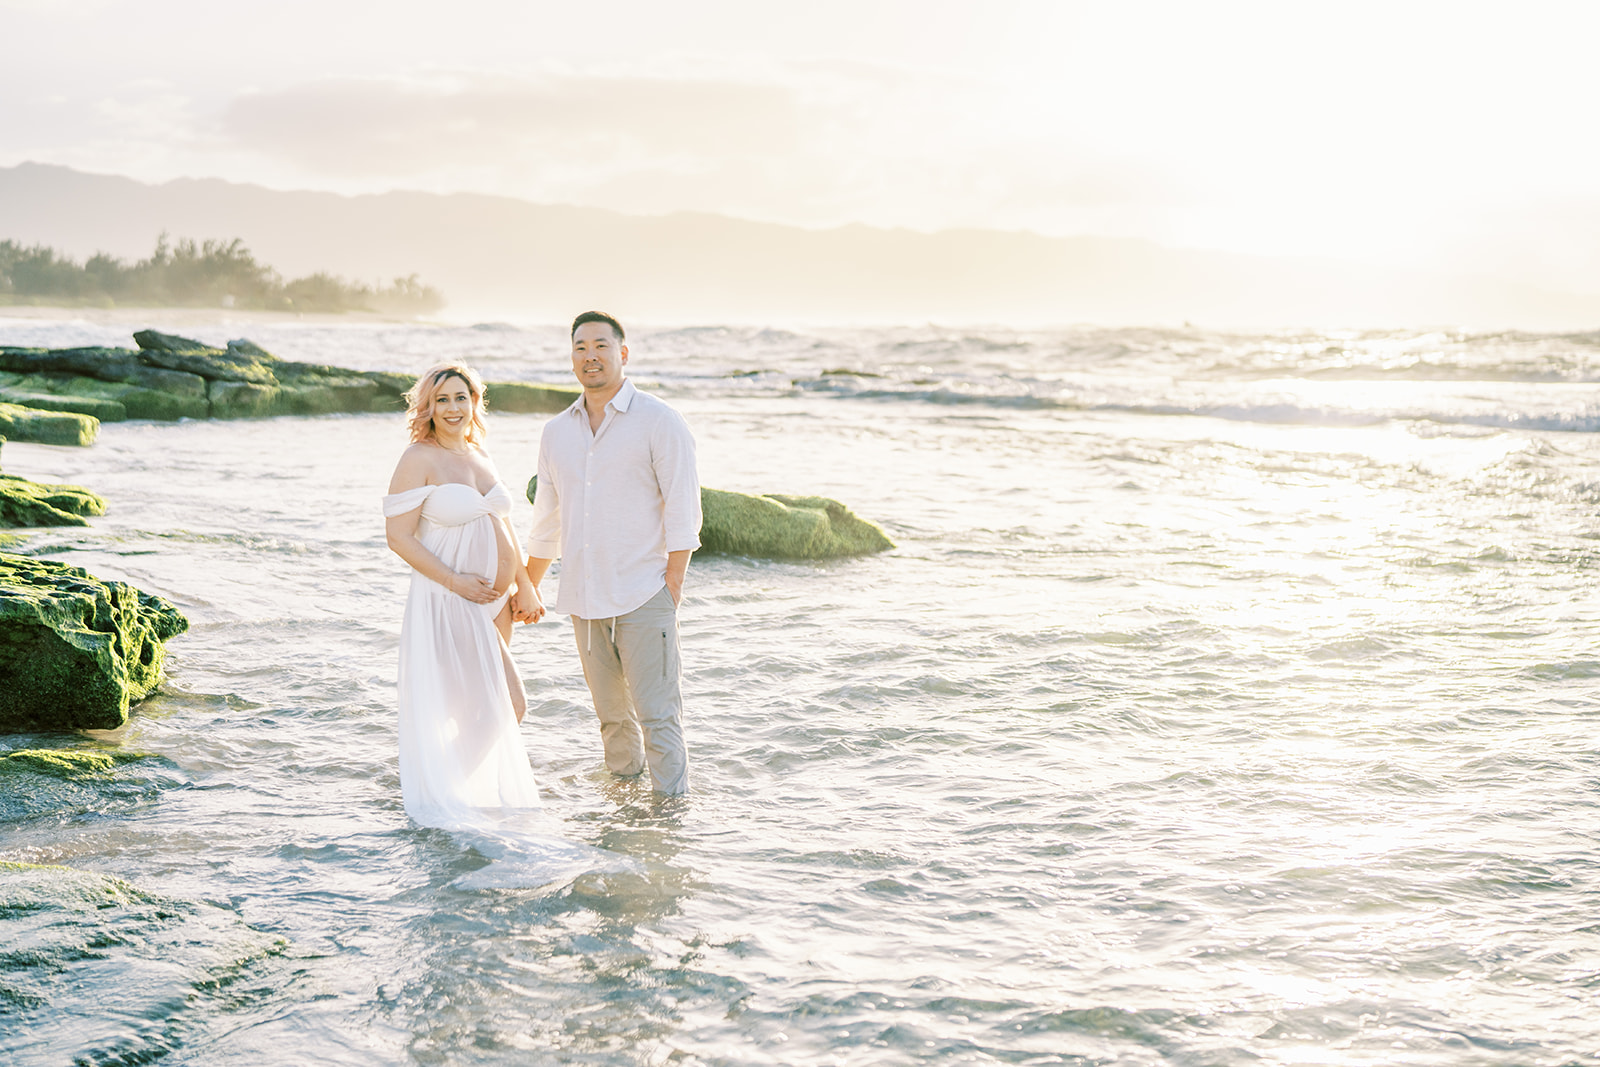 A couple holding hands looking ahead during their Maternity Session with Megan Moura on Oahu beach during sunset.